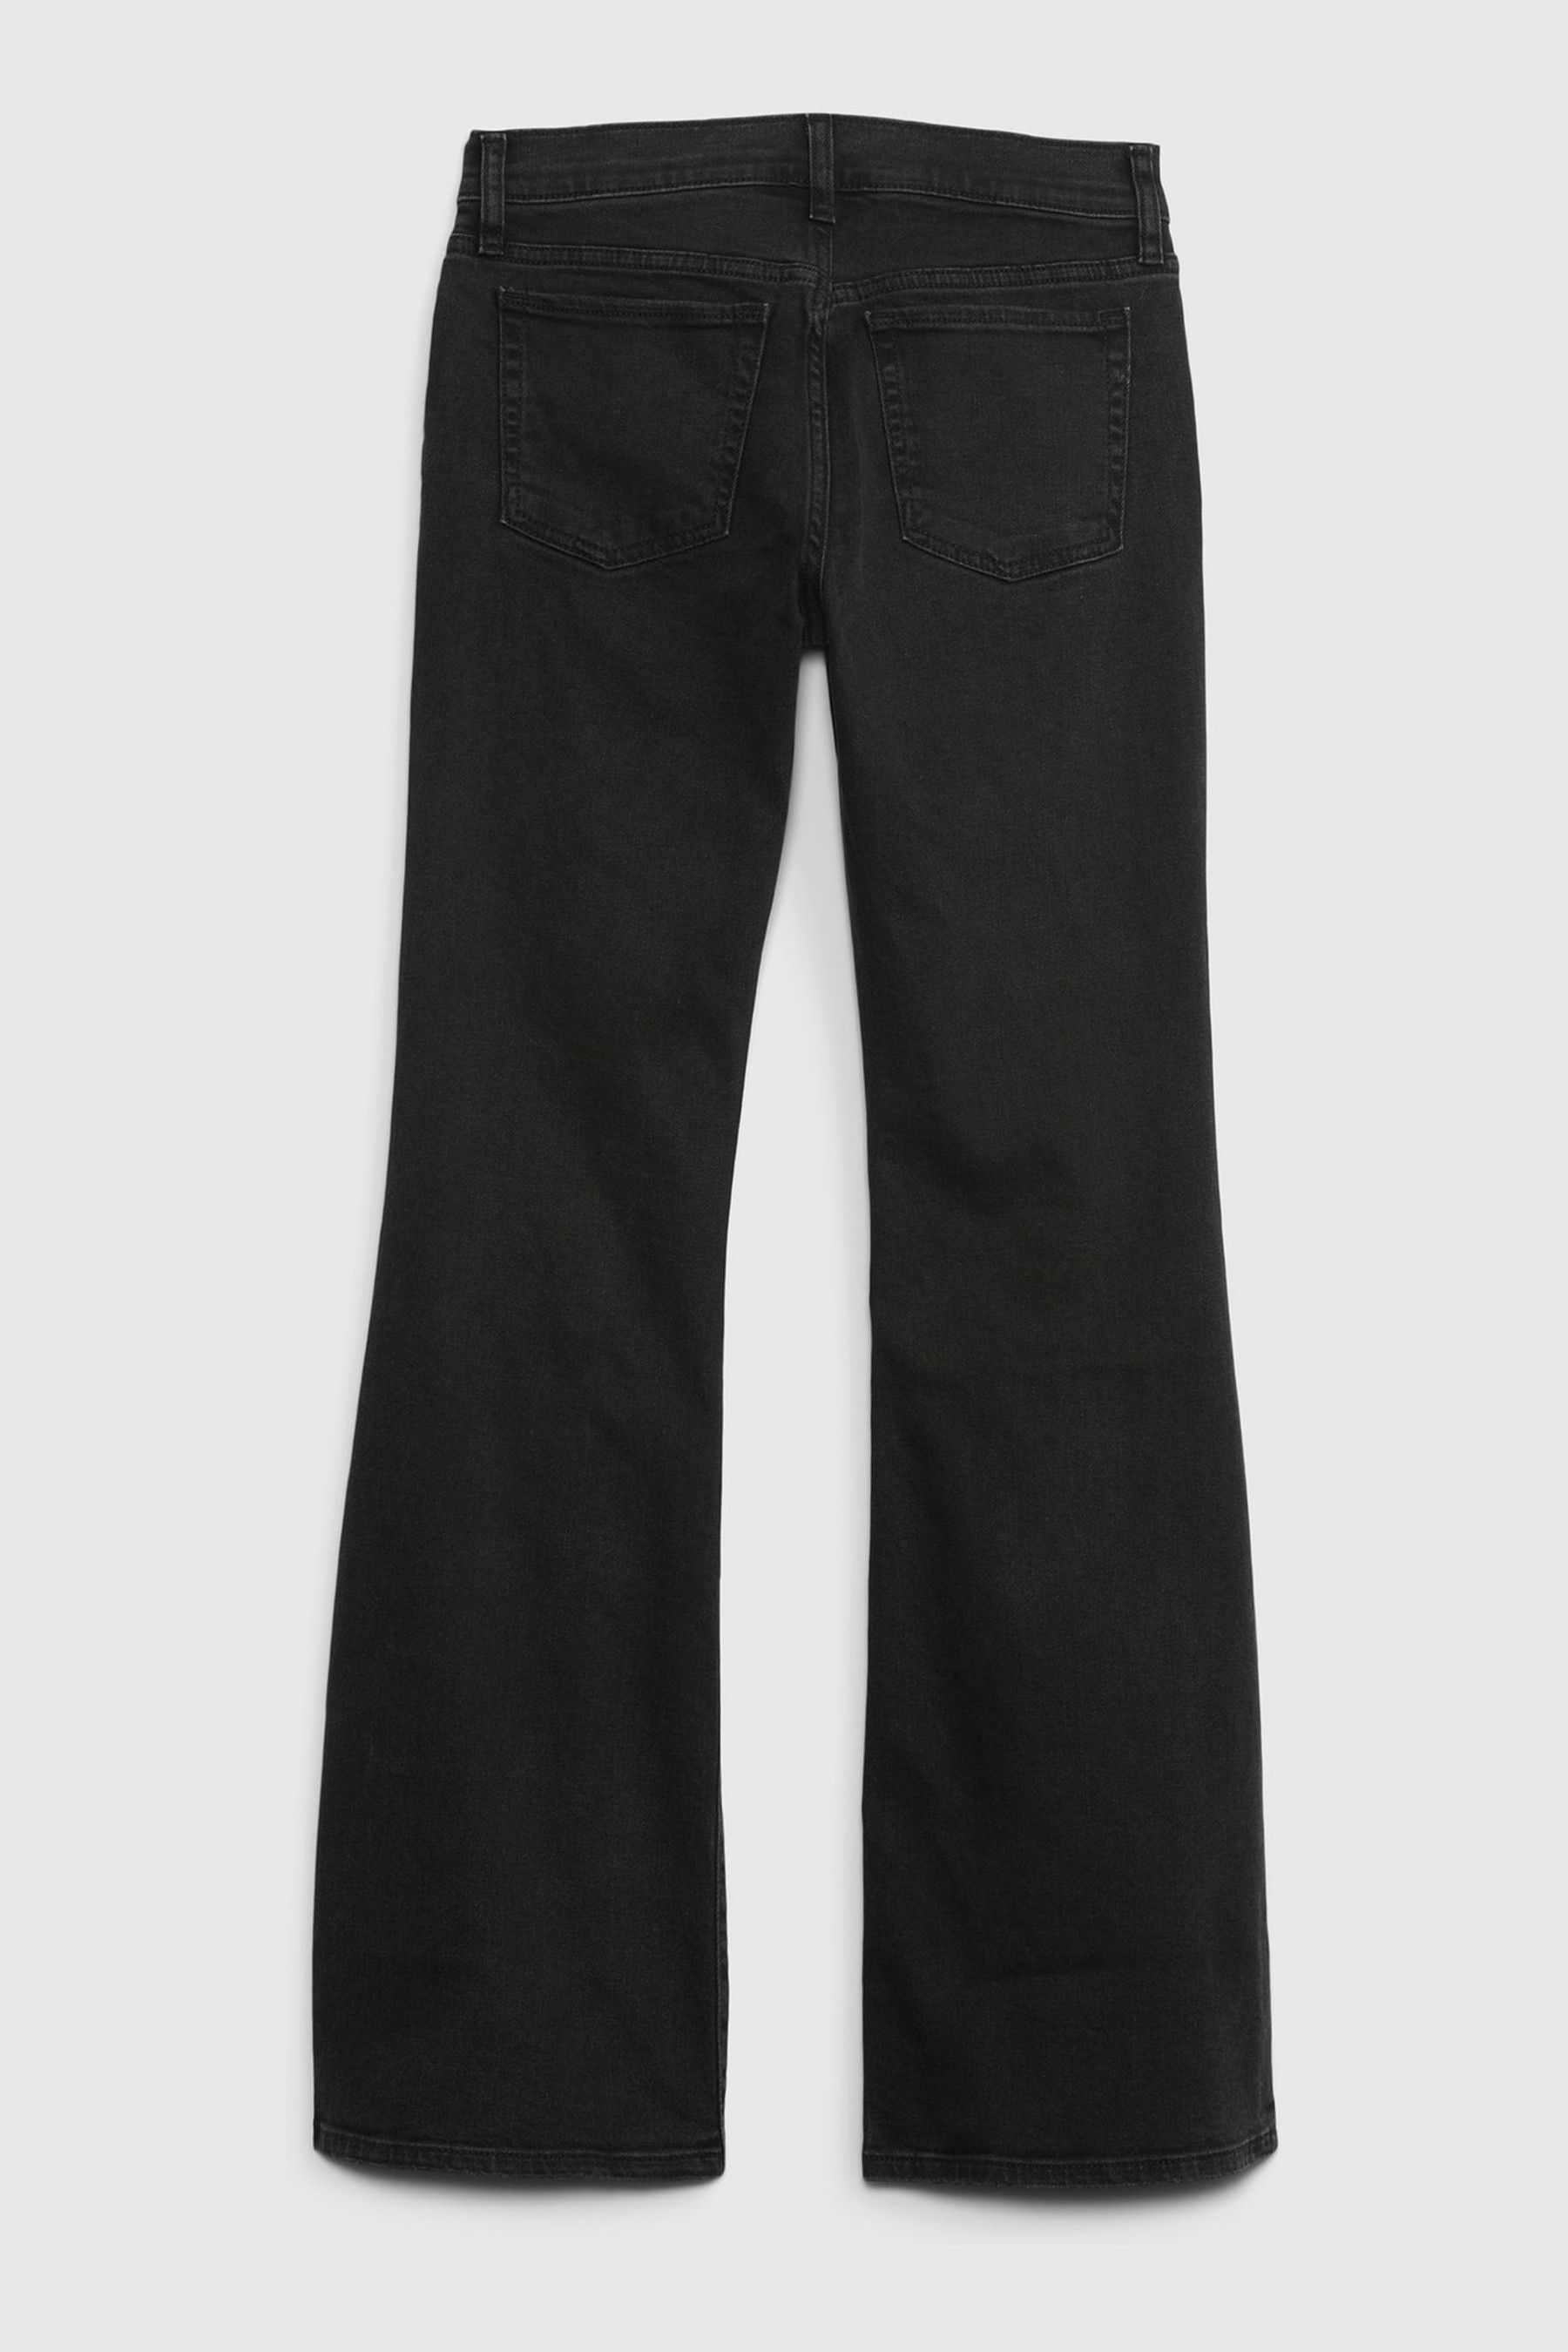 Buy Gap Teen Low Rise Flare Jeans from Next Ireland